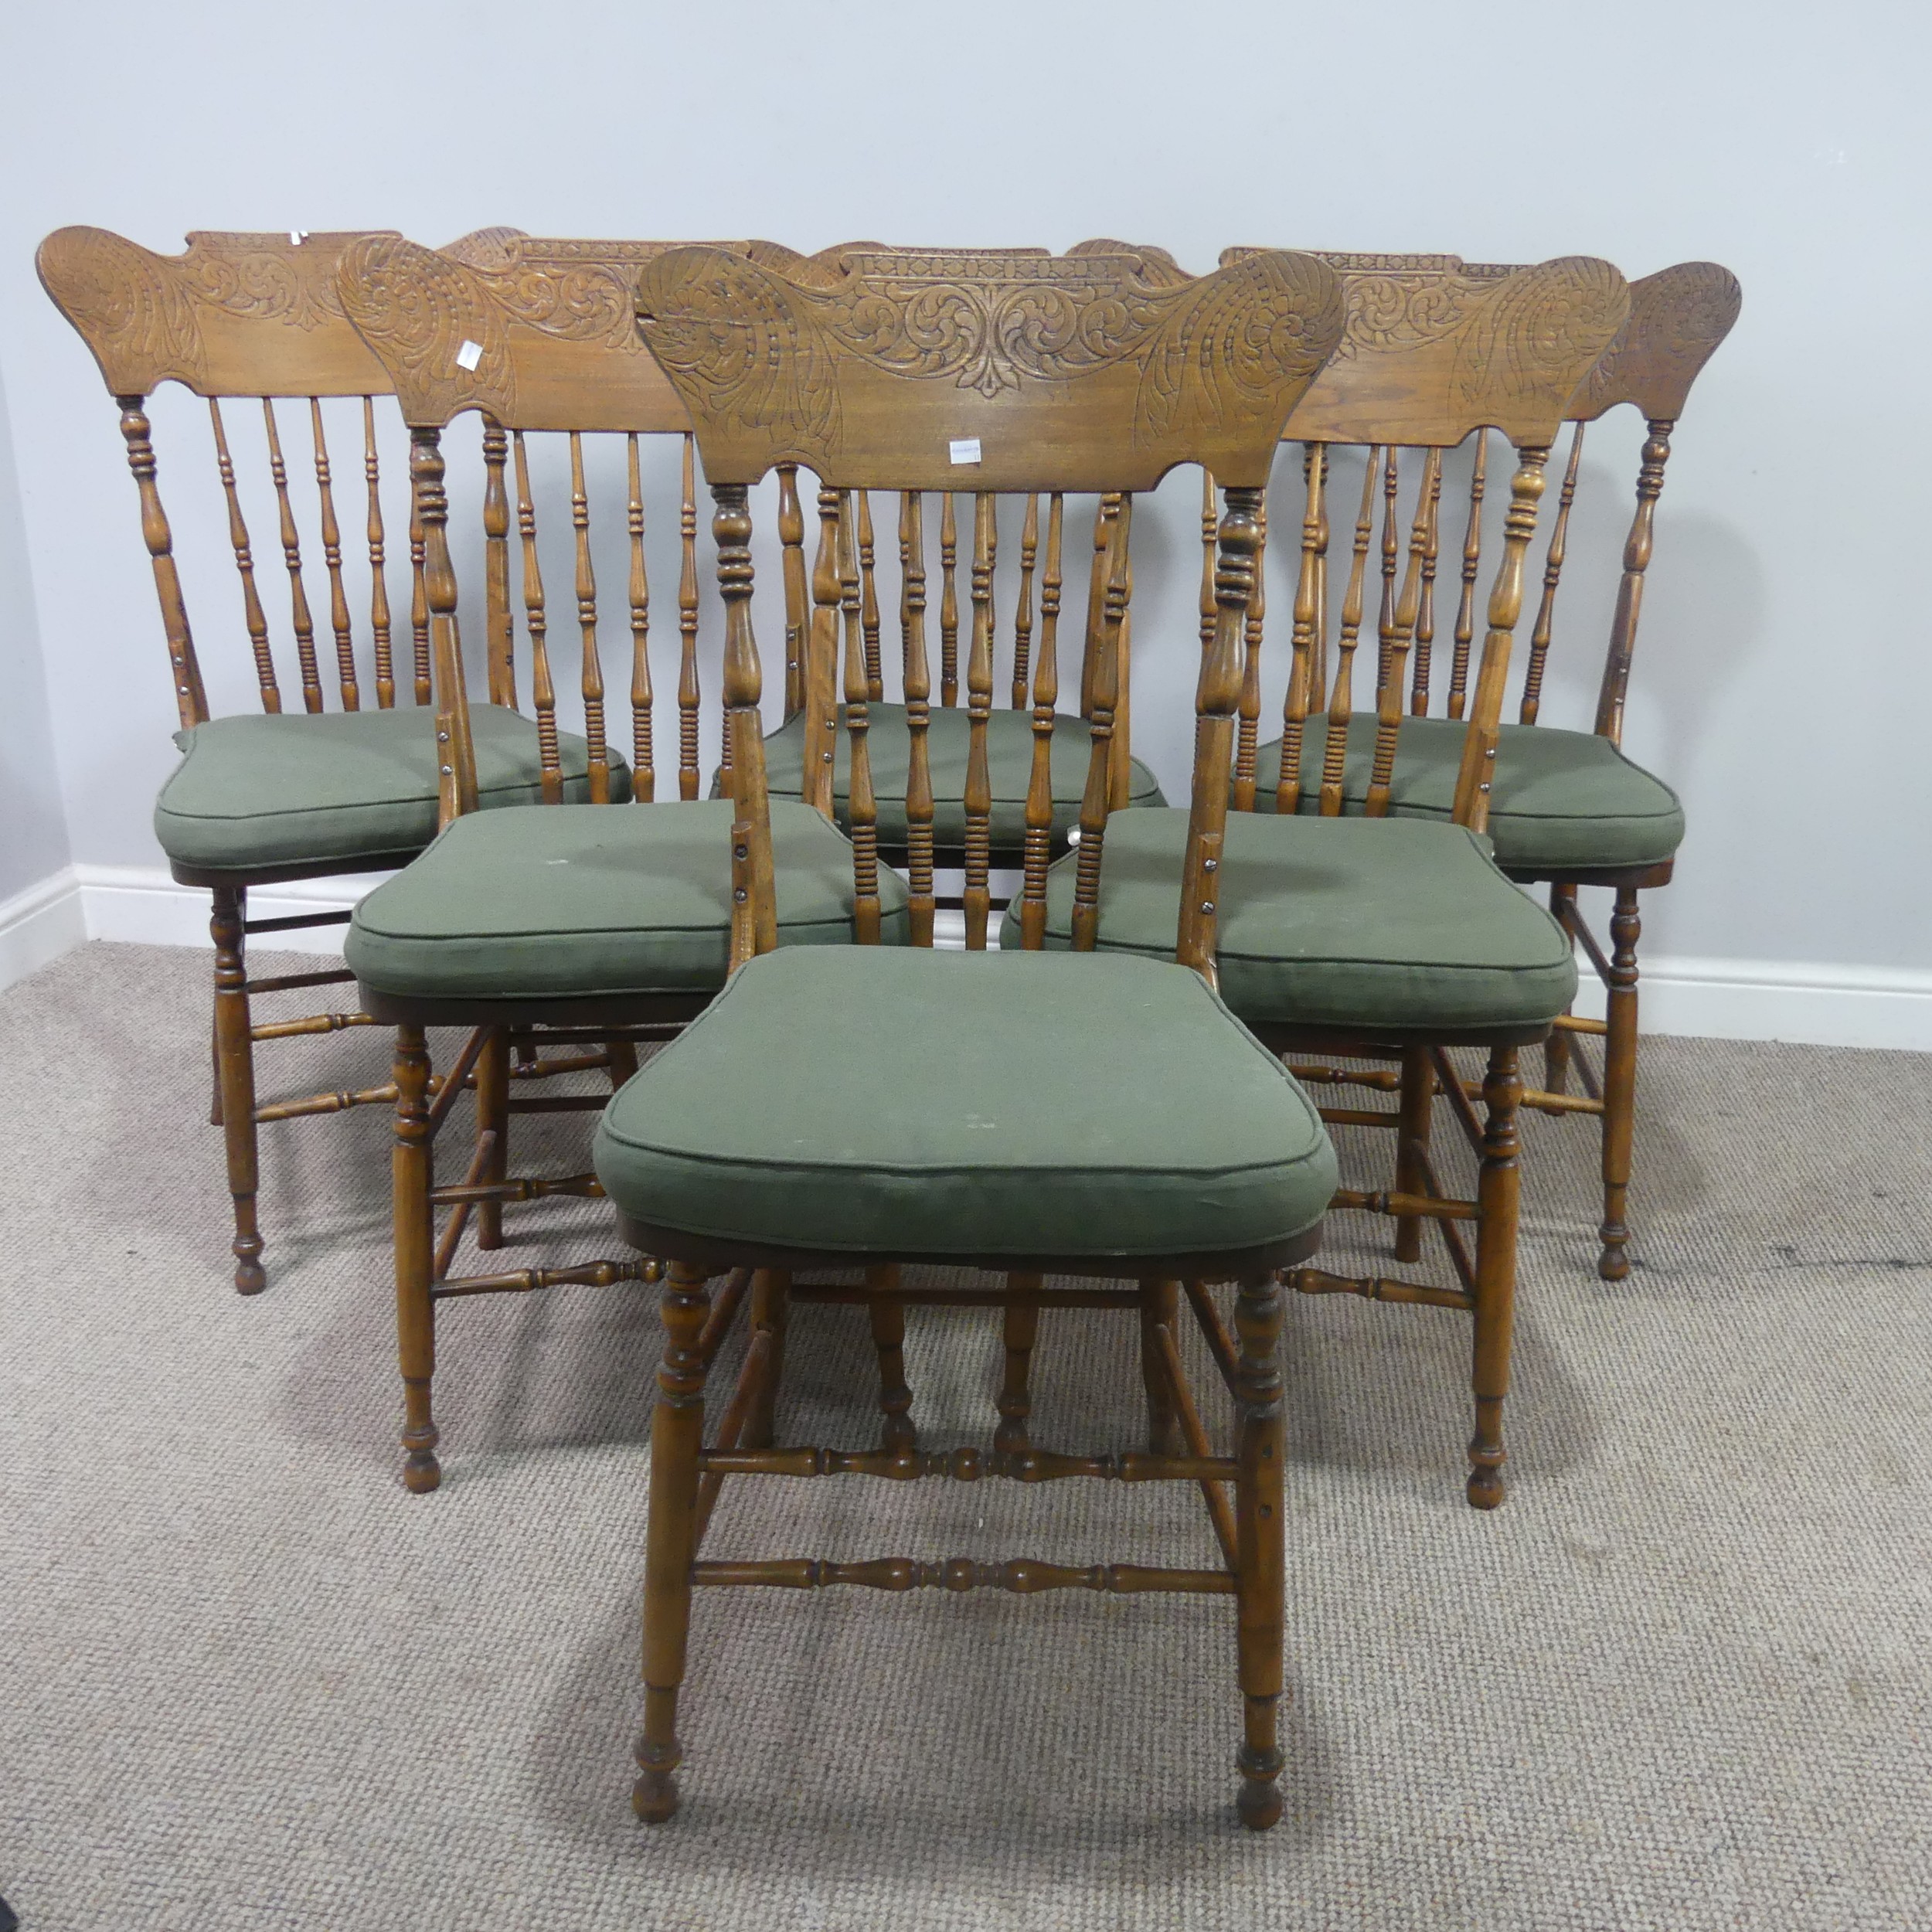 A set of six early 20th century Canadian Art Nouveau style spindle-back Dining Chairs, shaped carved